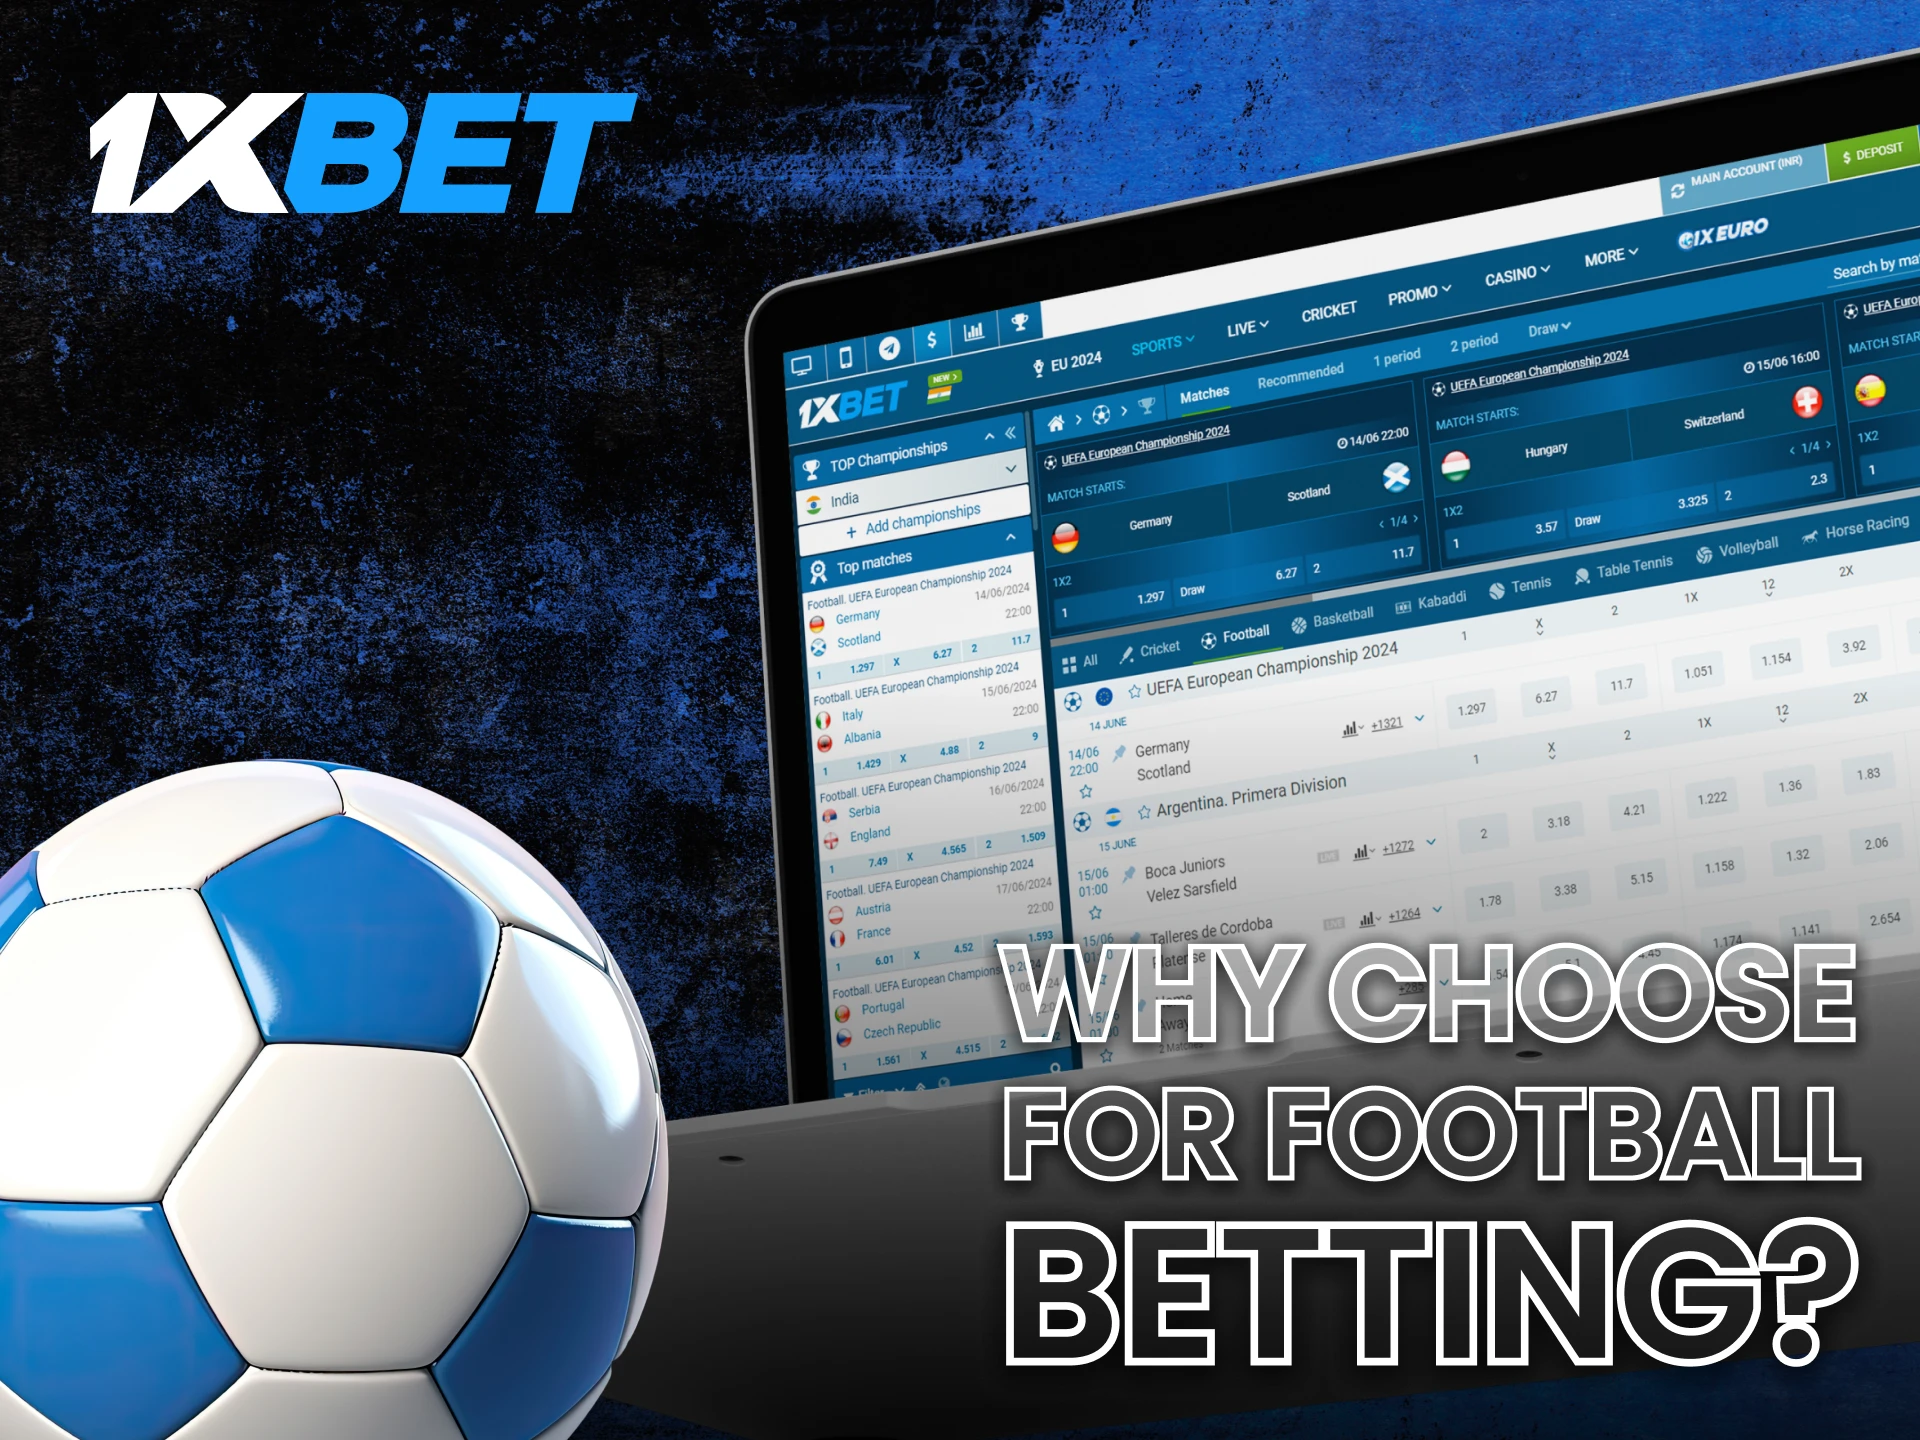 At 1xBet you can bet on live football events with high odds.